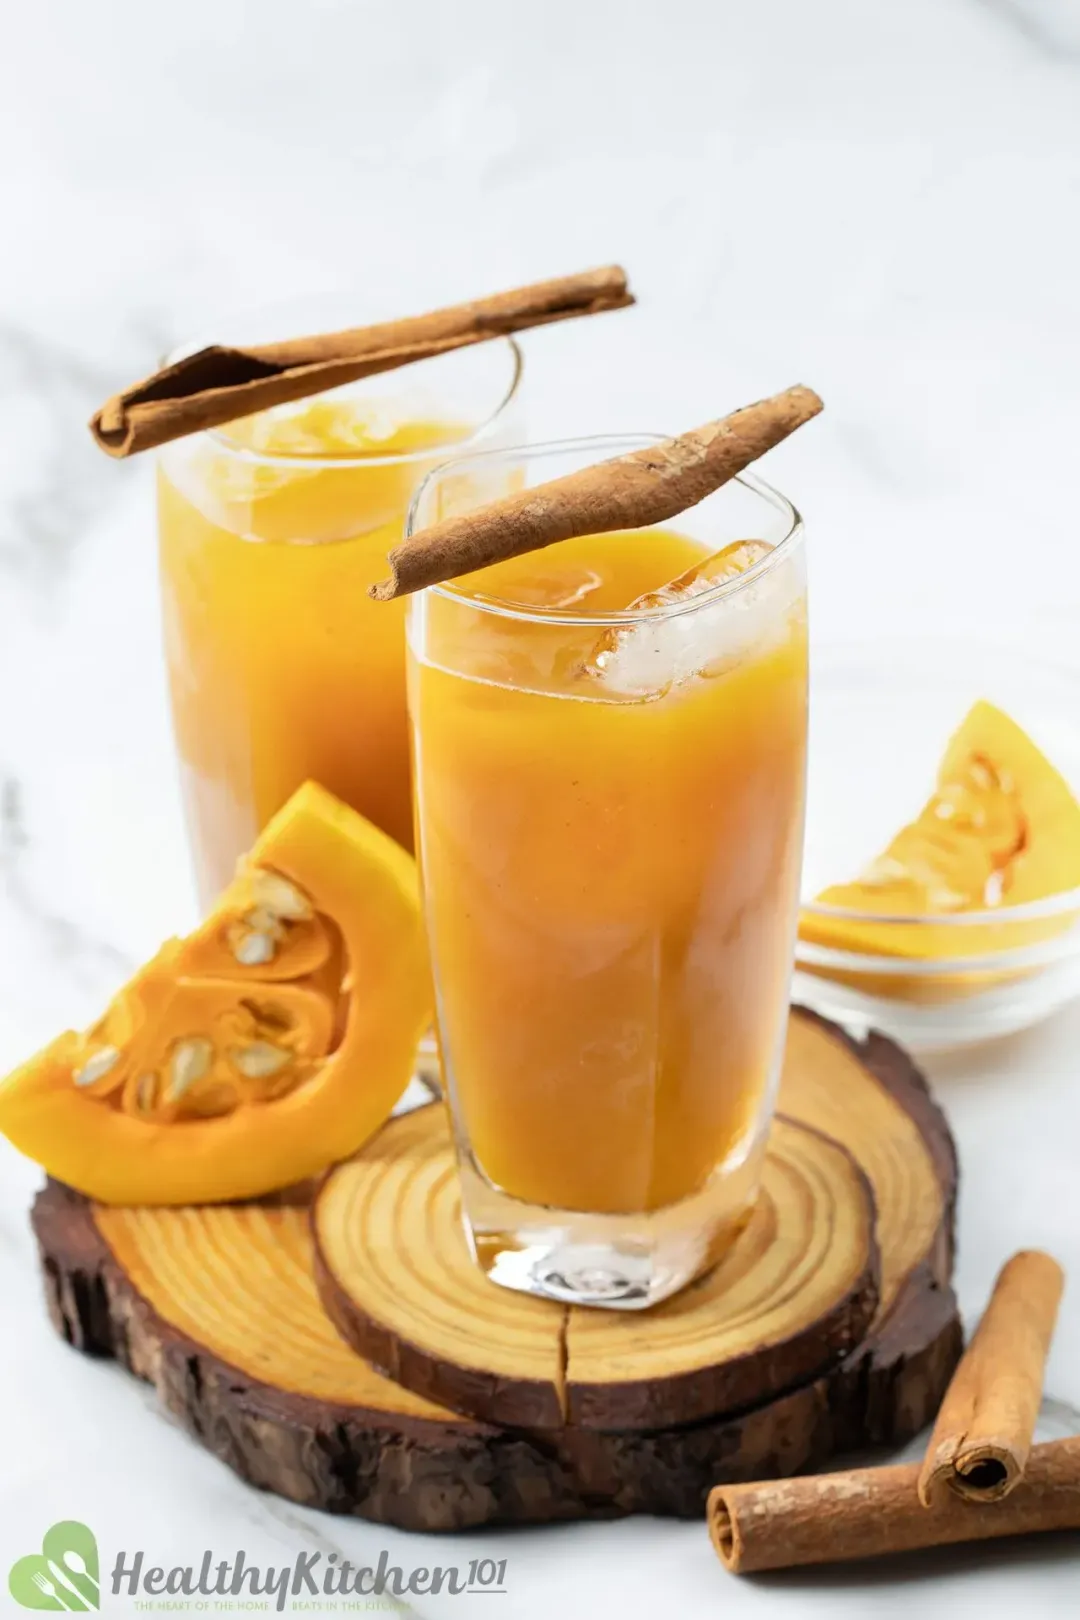 Two glasses of iced pumpkin juice decorated with cinnamon sticks on top of wooden coasters next to pumpkin slices and cinnamon sticks